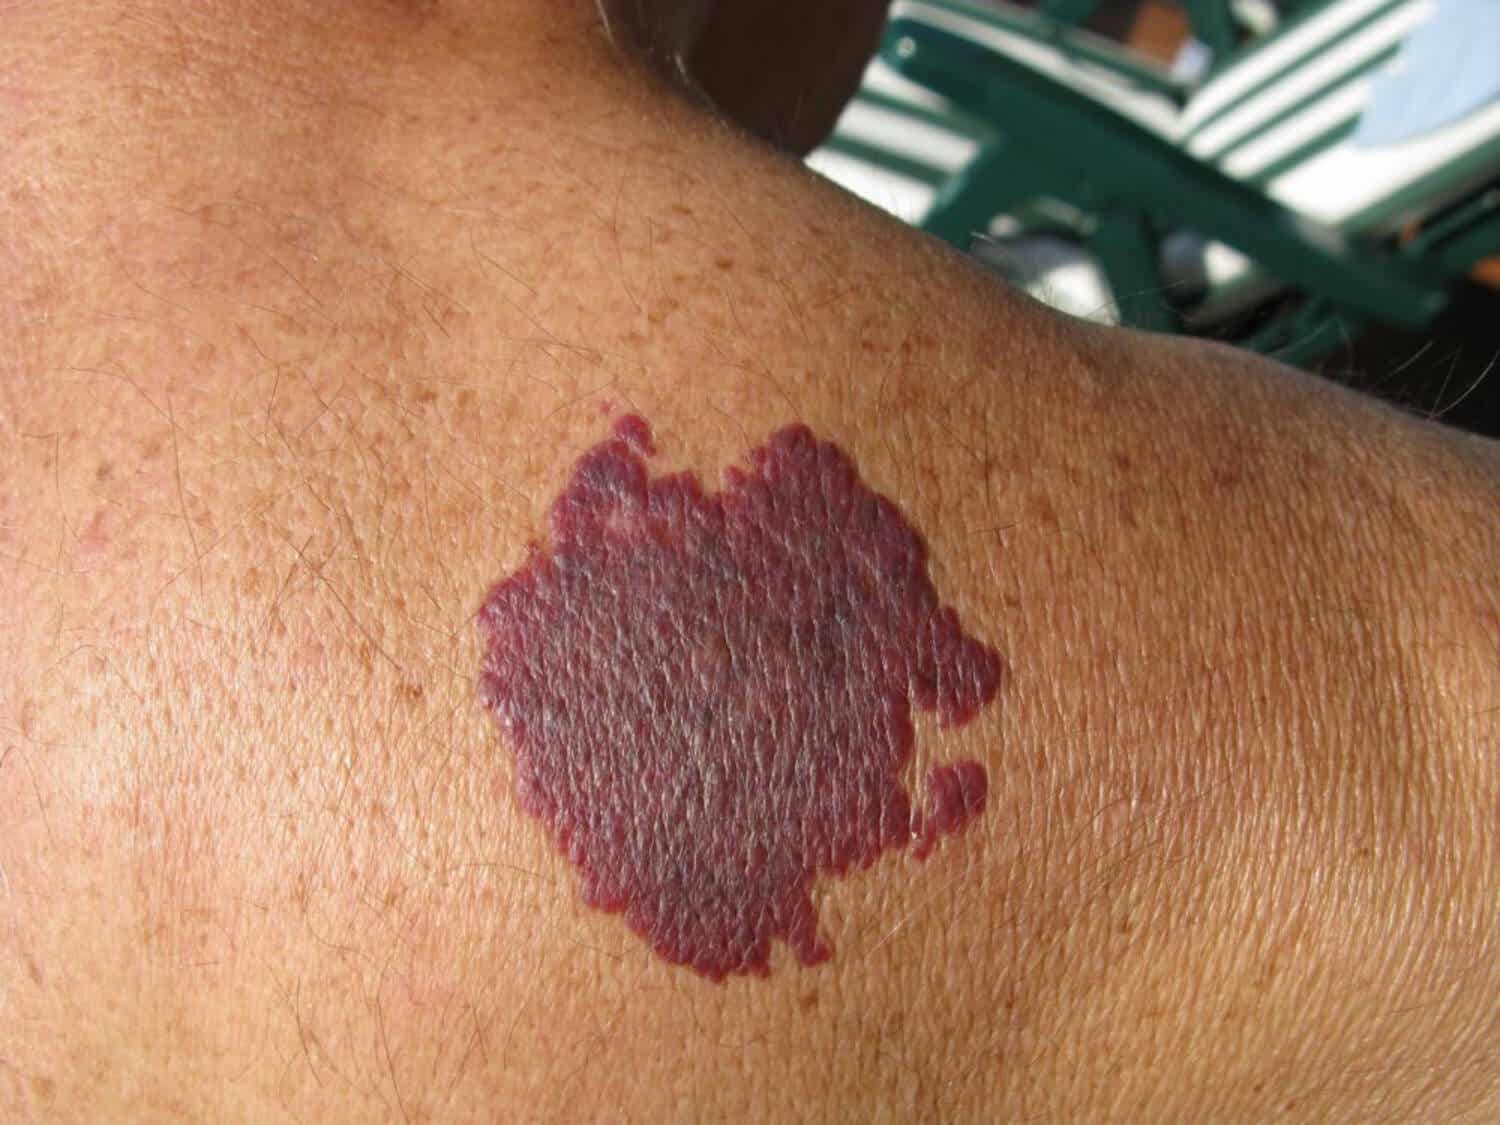 A large purple spot on a person's back.